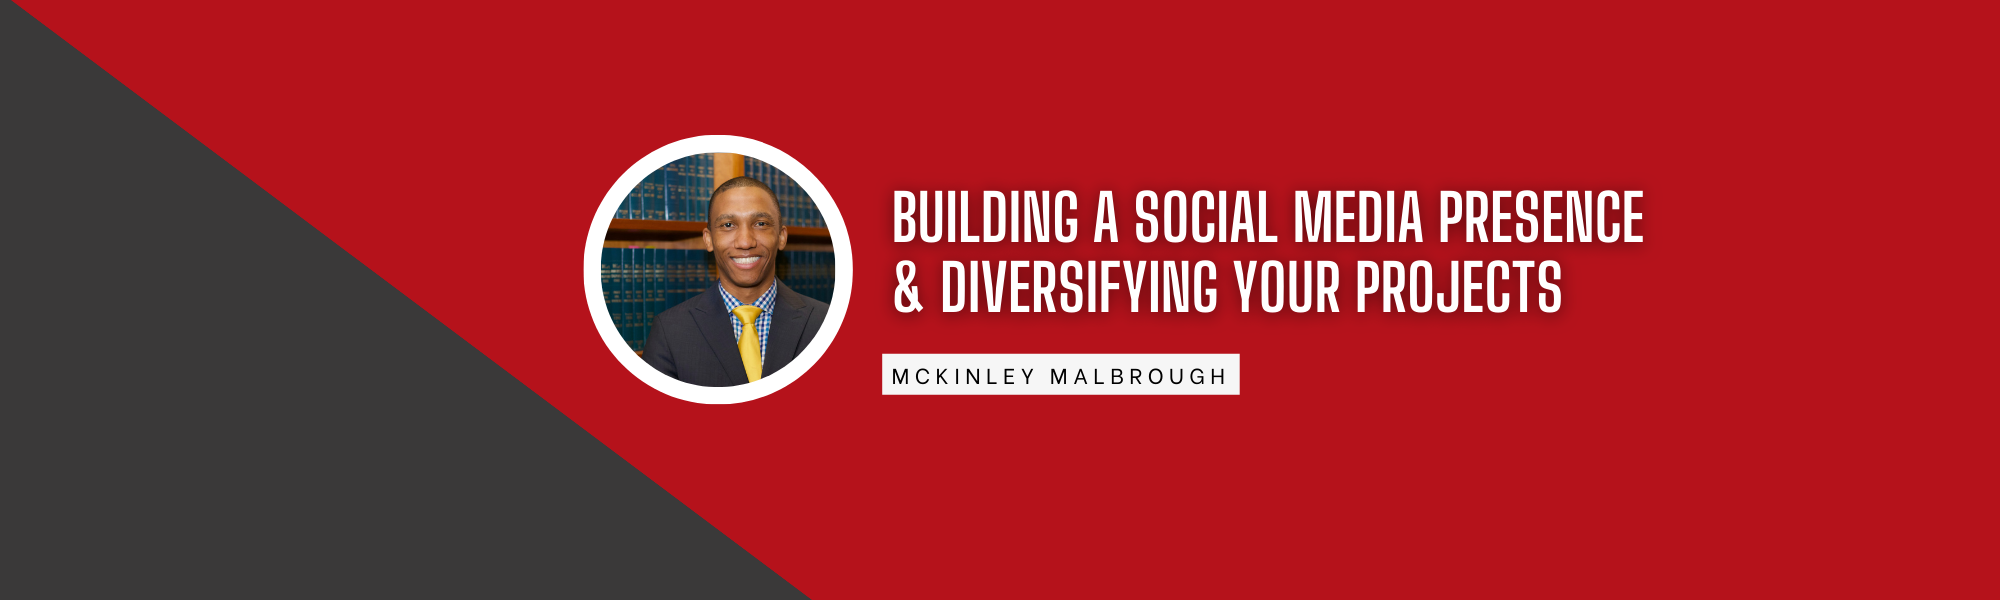 Building a Social Media Presence & Diversifying Your Projects Hero Image